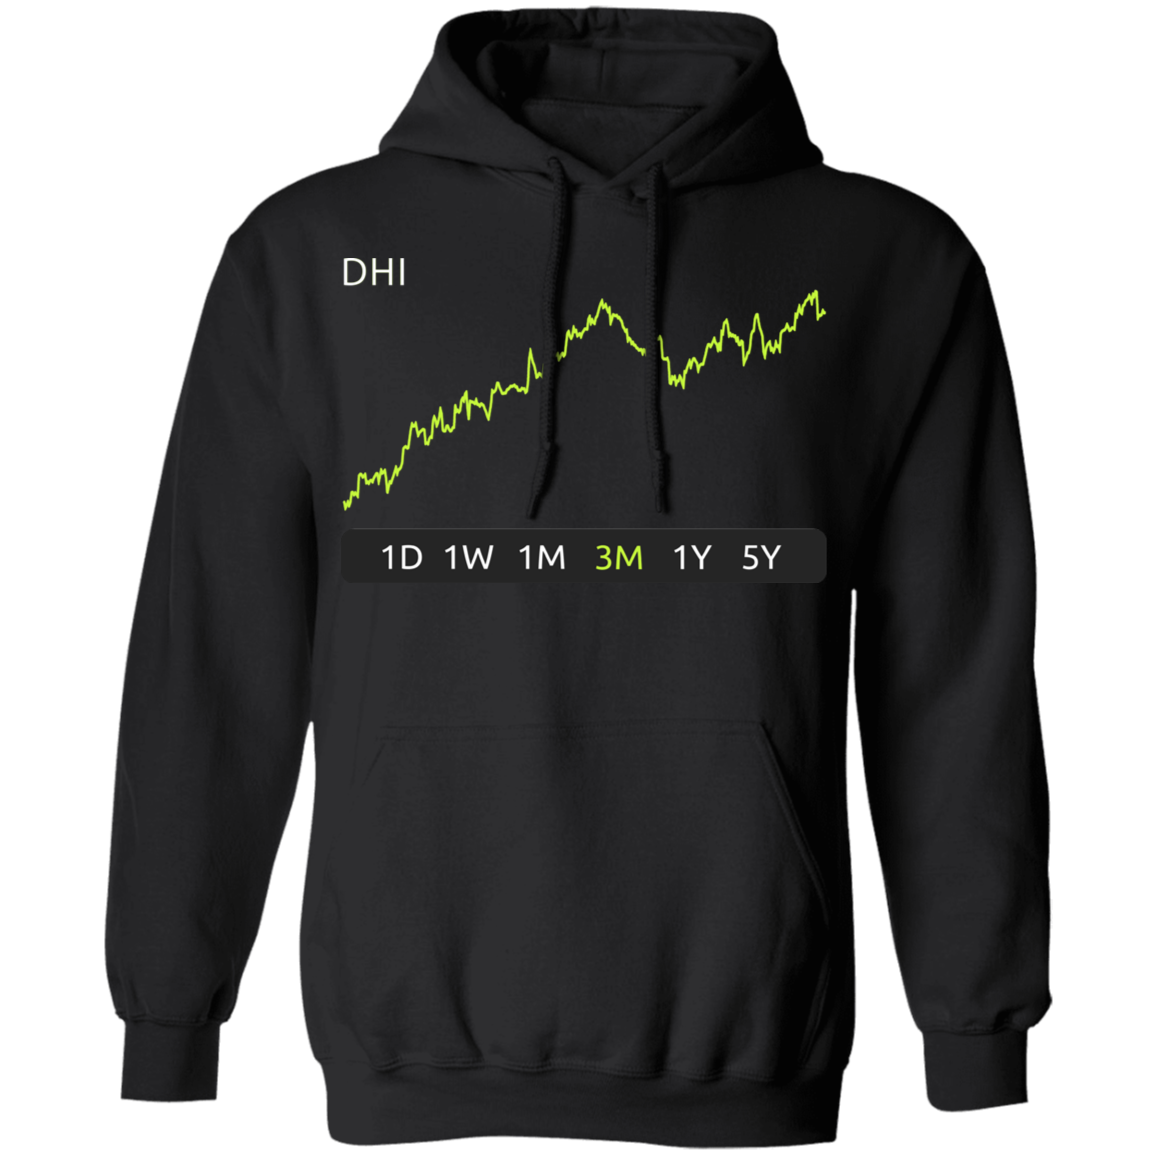 DHI Stock 3m Pullover Hoodie